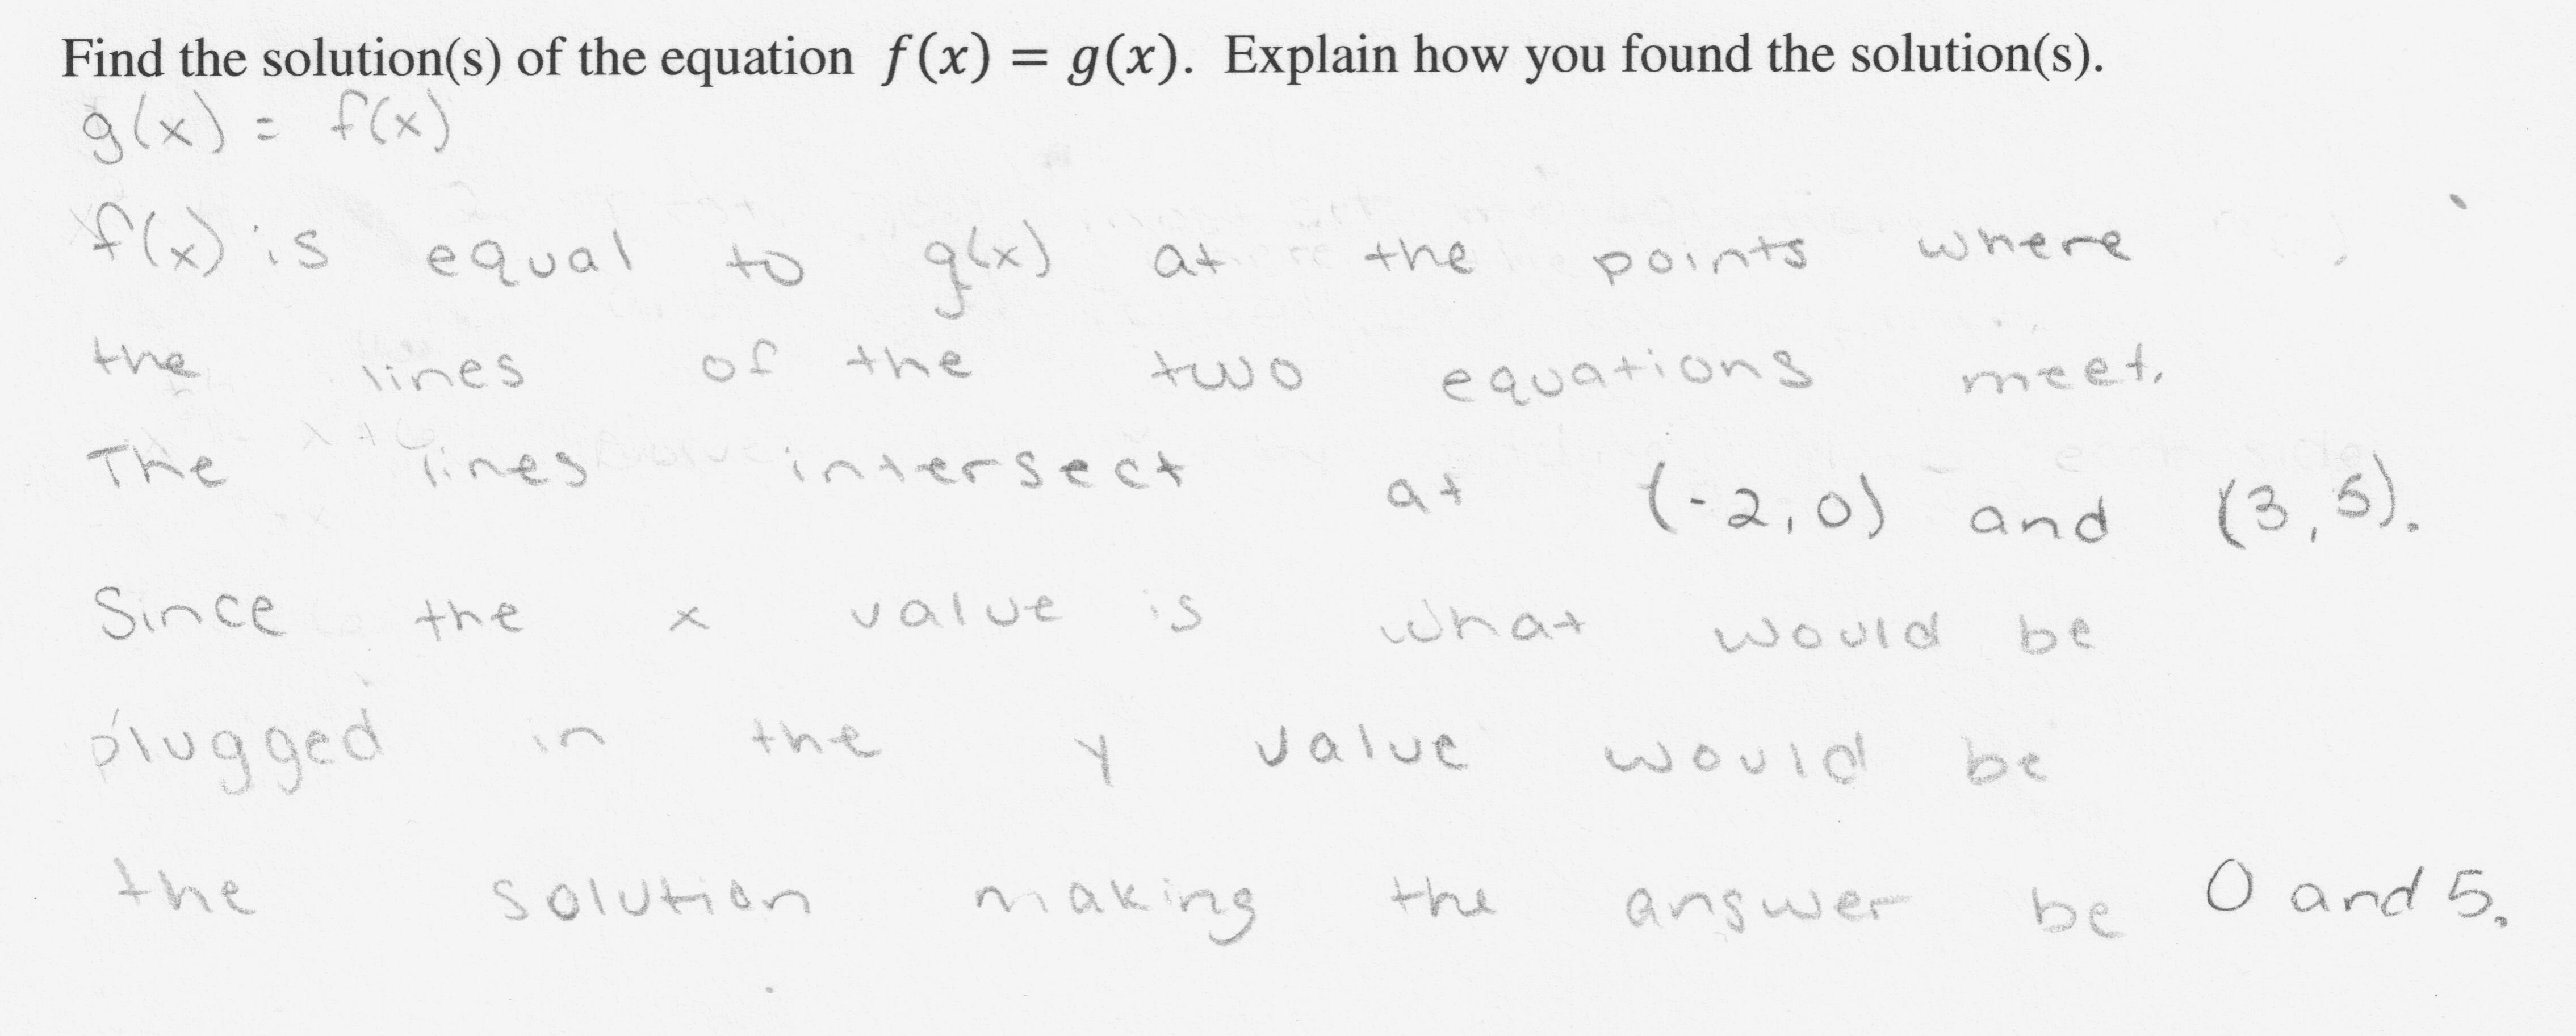 Graphs And Solutions 2 Students Are Asked To Find The Solution S Of The Equation F X G X Give